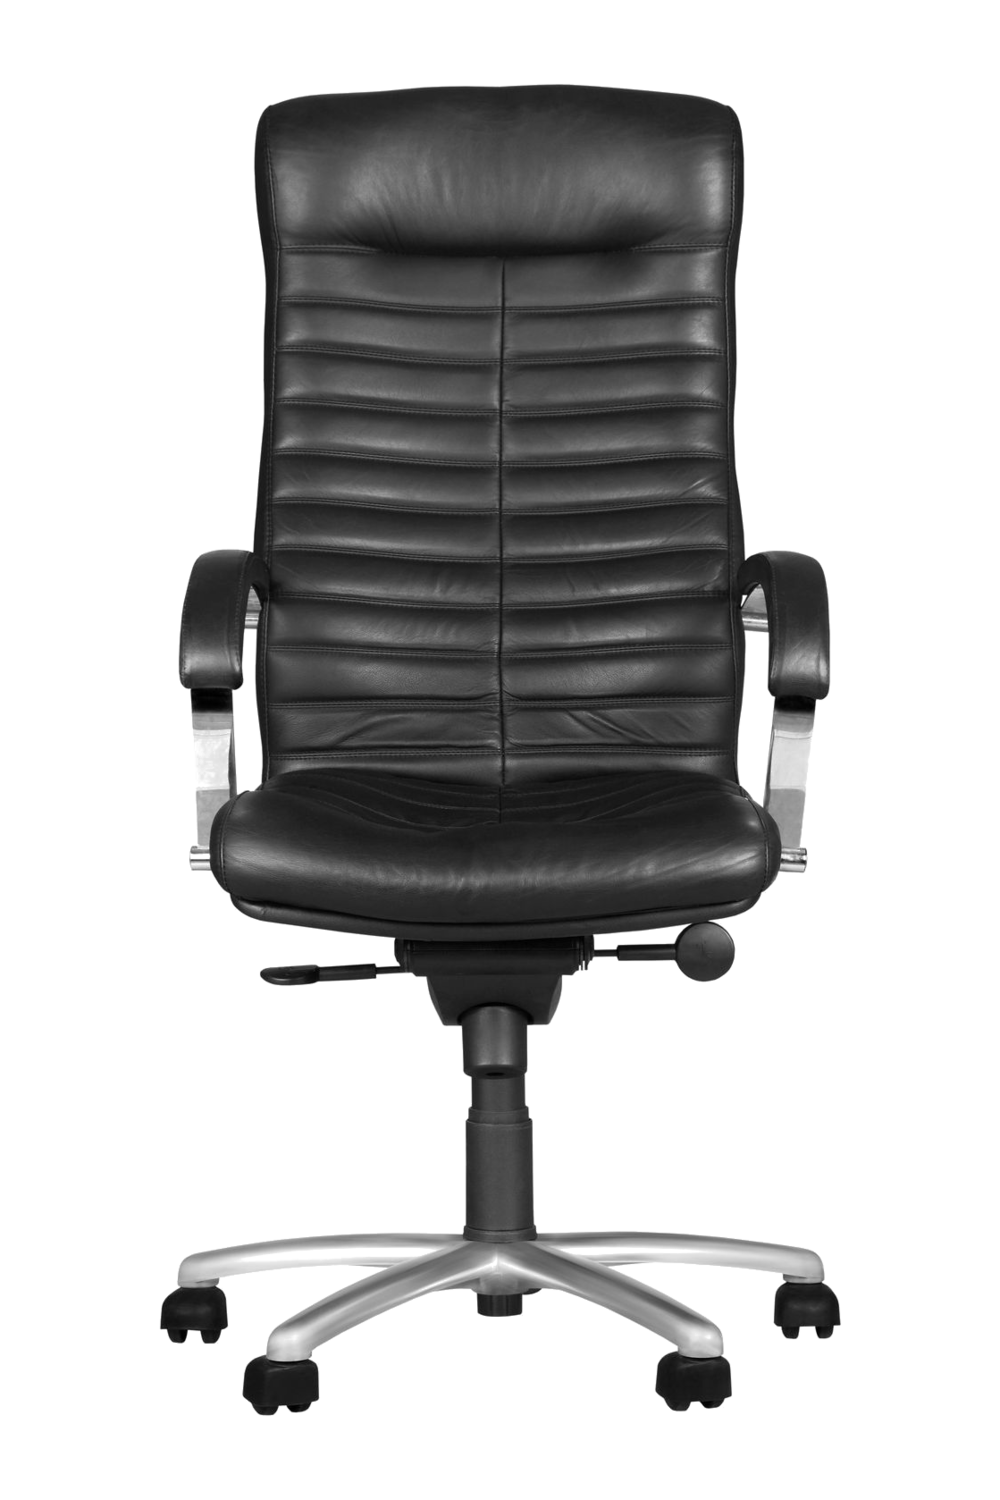 learning clipart seat